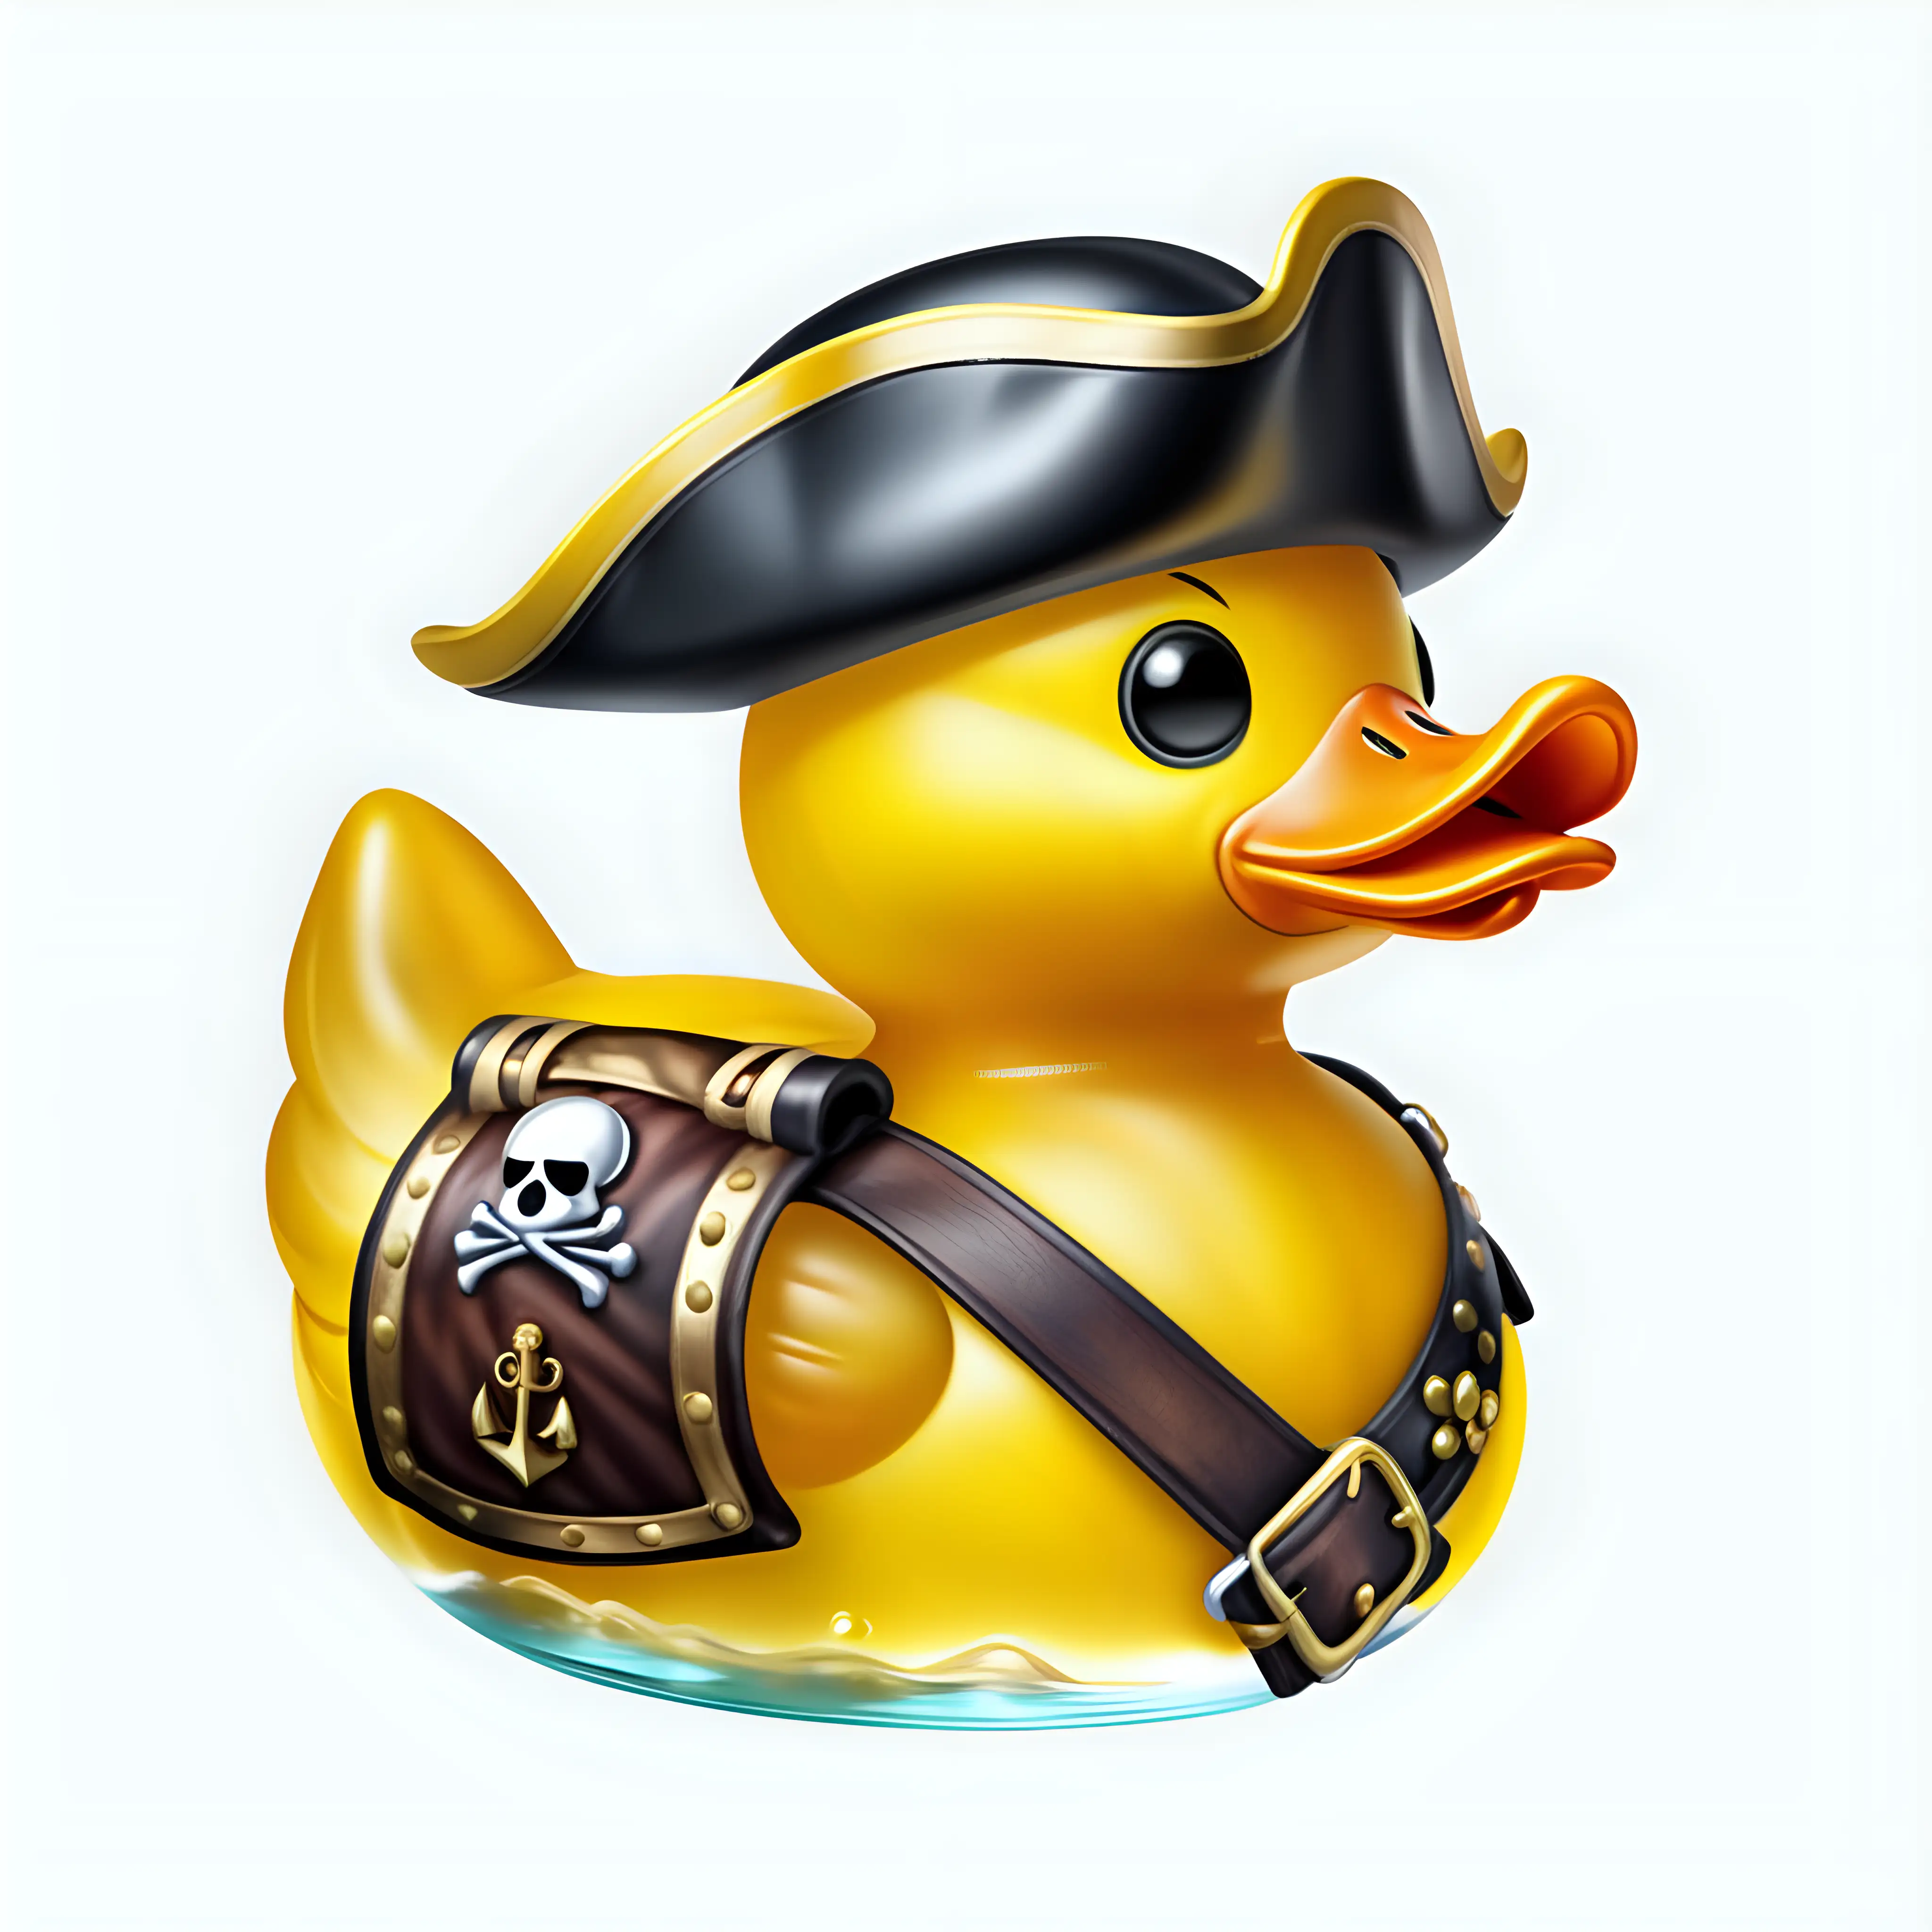 Pirate Rubber Duck Floating on a Clear Background